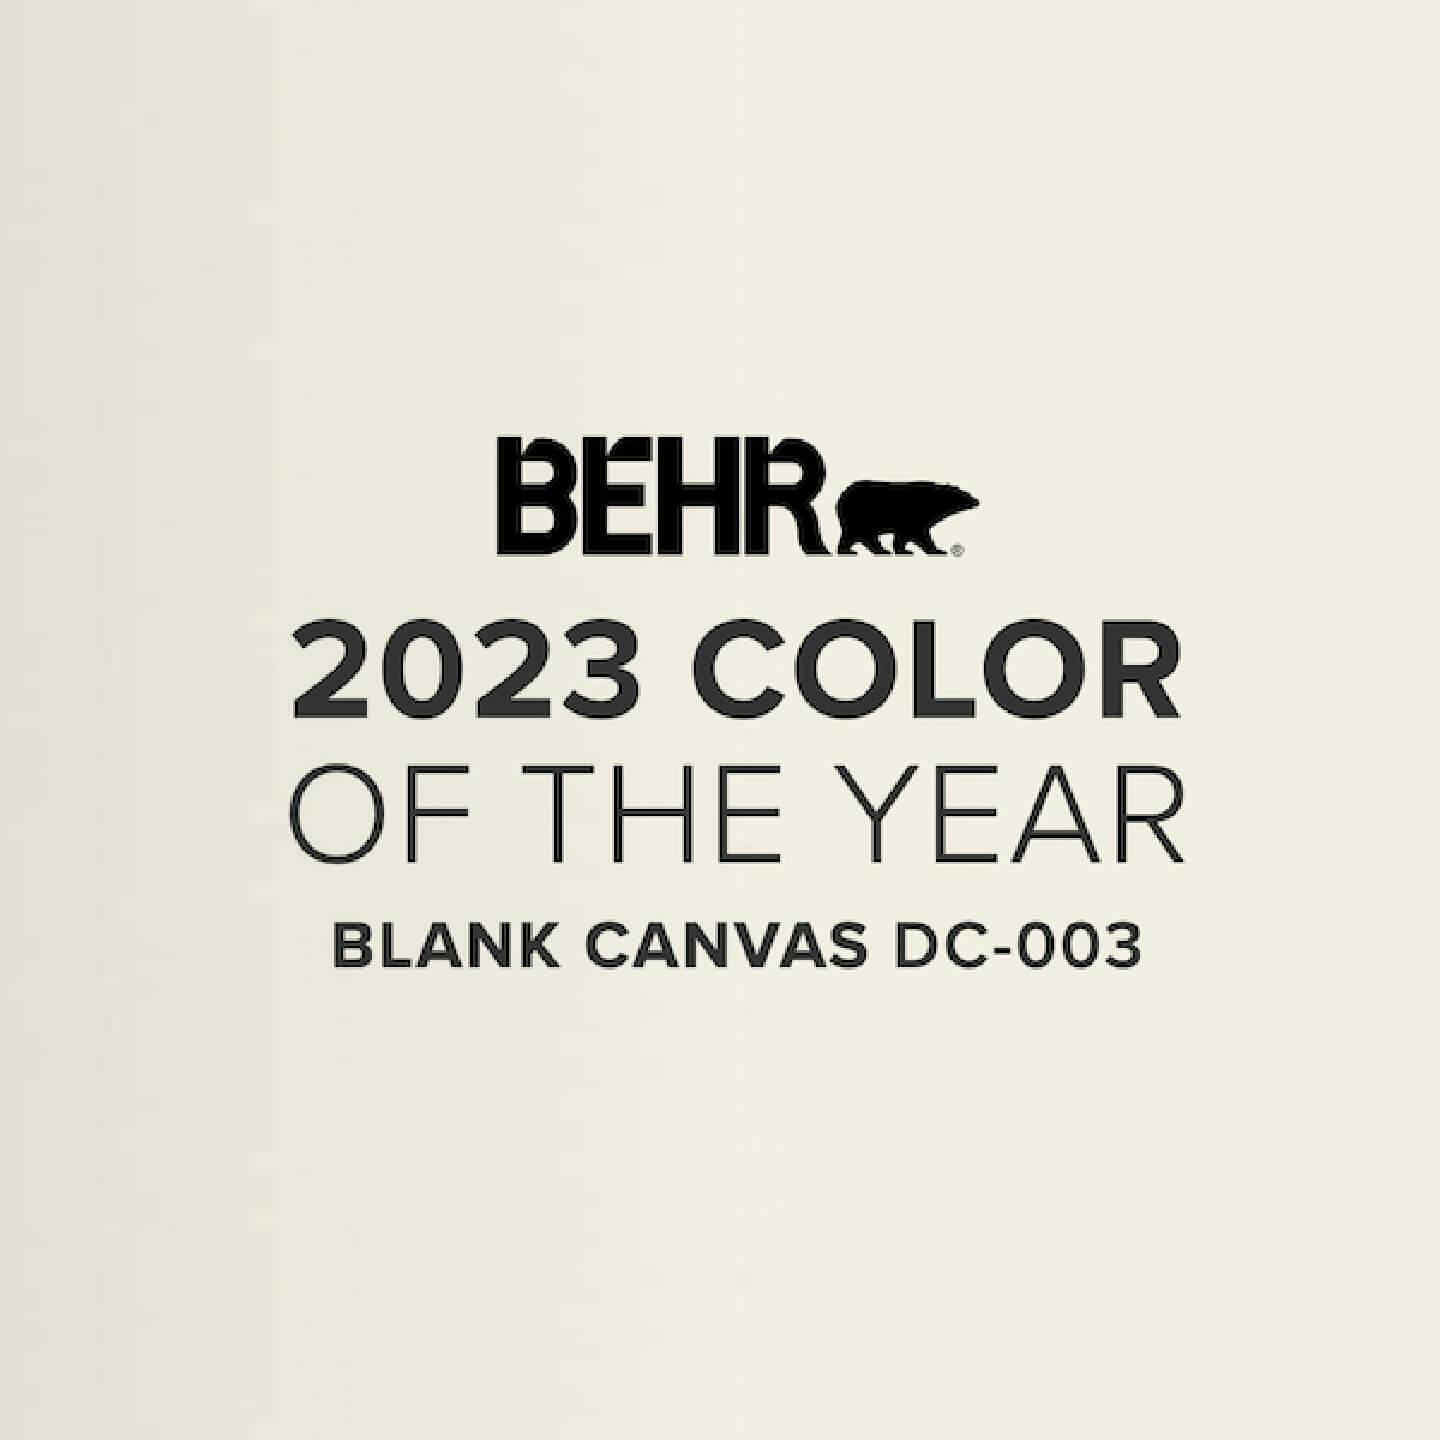 Graphic for Behr 2023 Color of the Year Blank Canvas DC-003